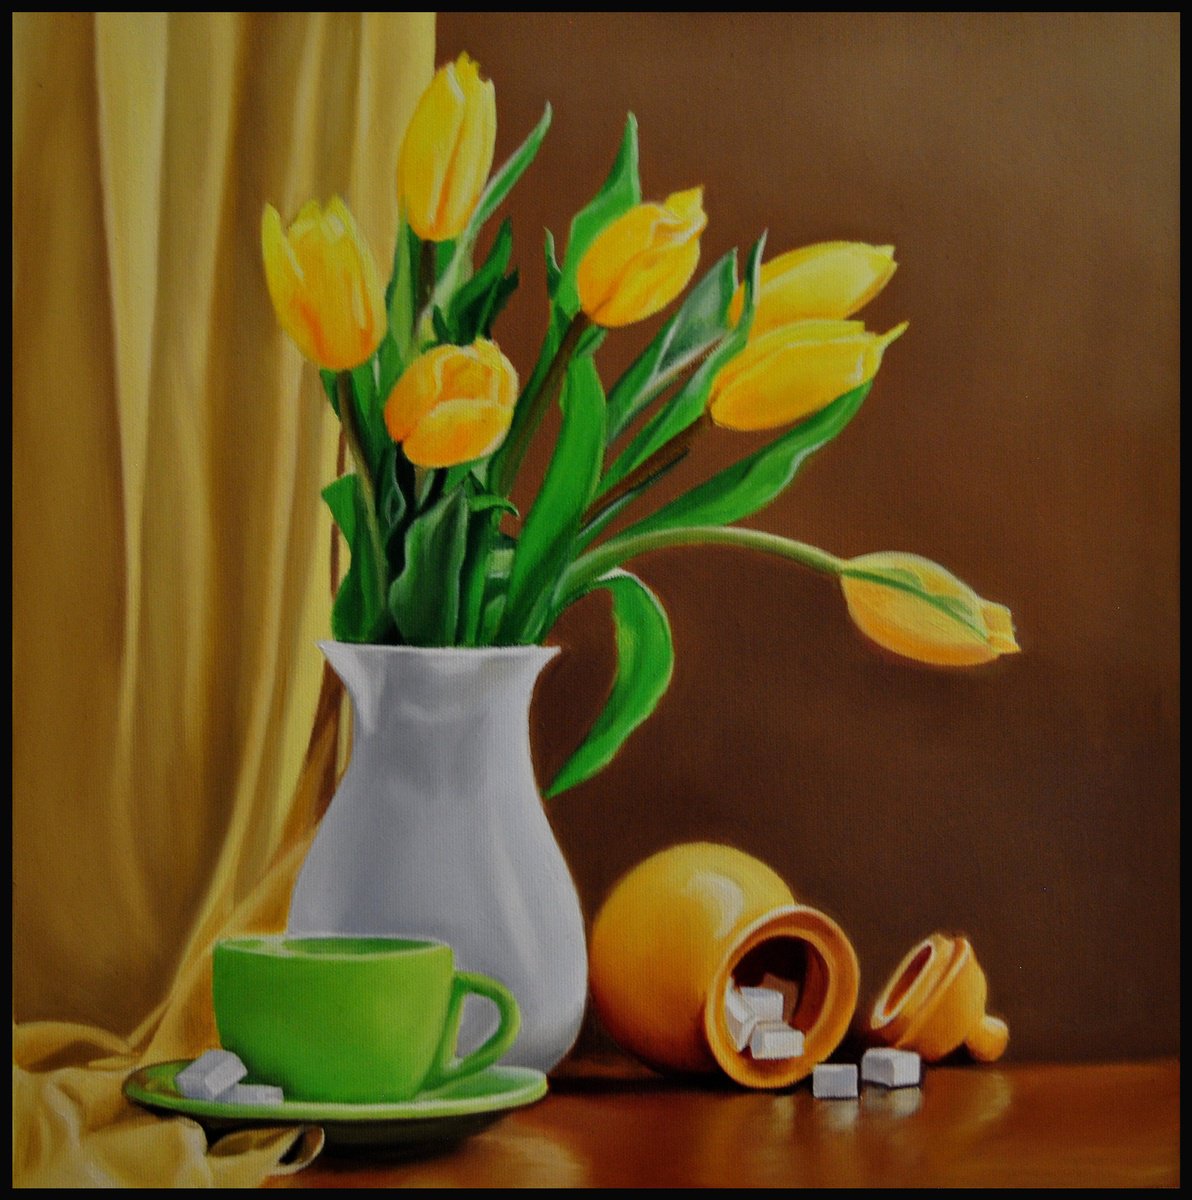 Still Life with Flowers and a Cup of Tea by Simona Tsvetkova